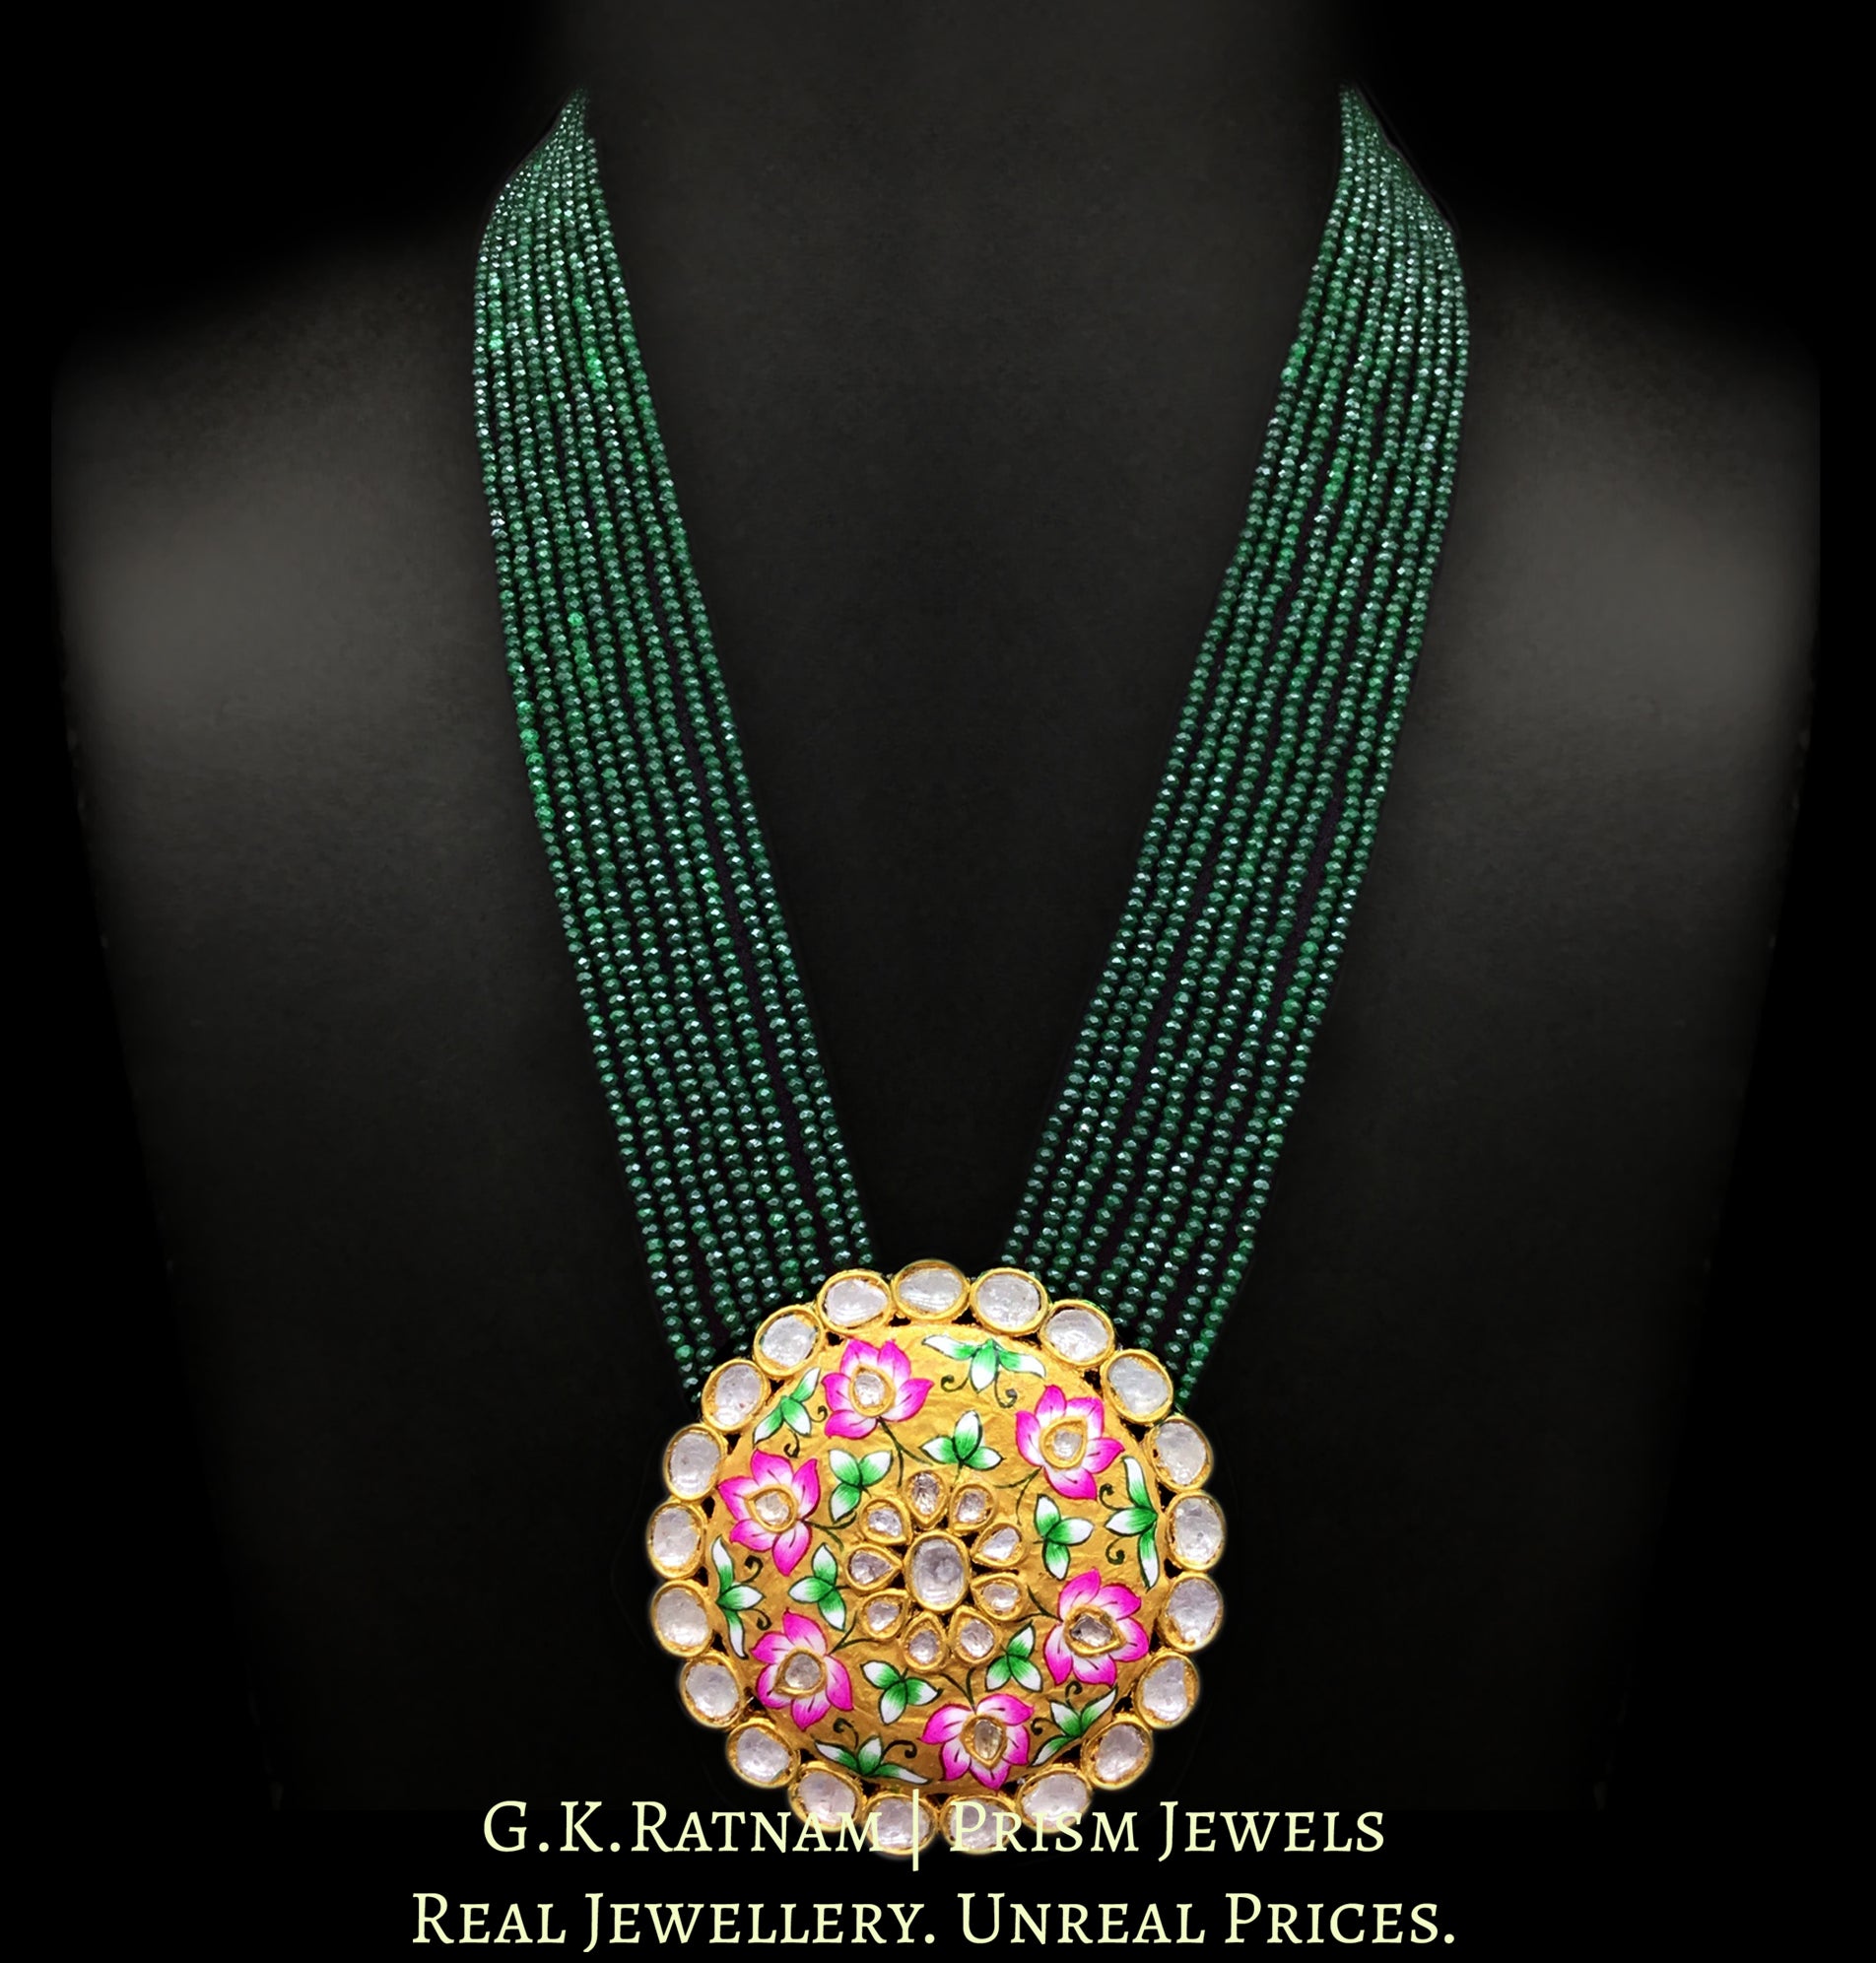 23k Gold and Diamond Polki big round Pendant Set with an array of vibrant colors and big uncut diamonds